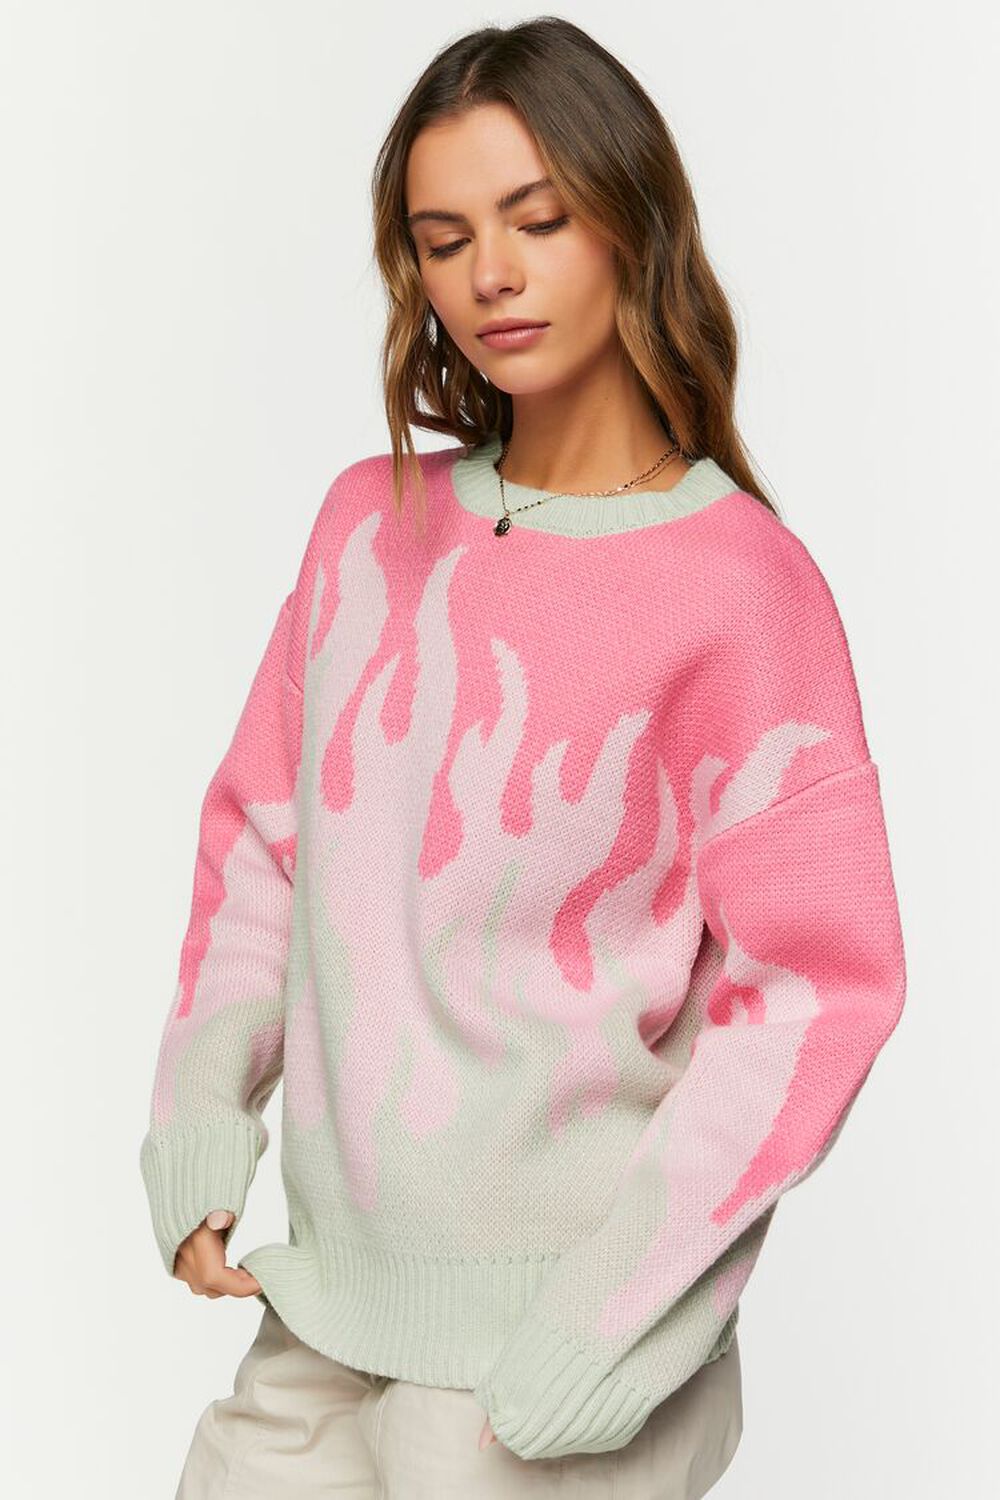 PINK/MULTI Abstract Flame Crew Sweater, image 2